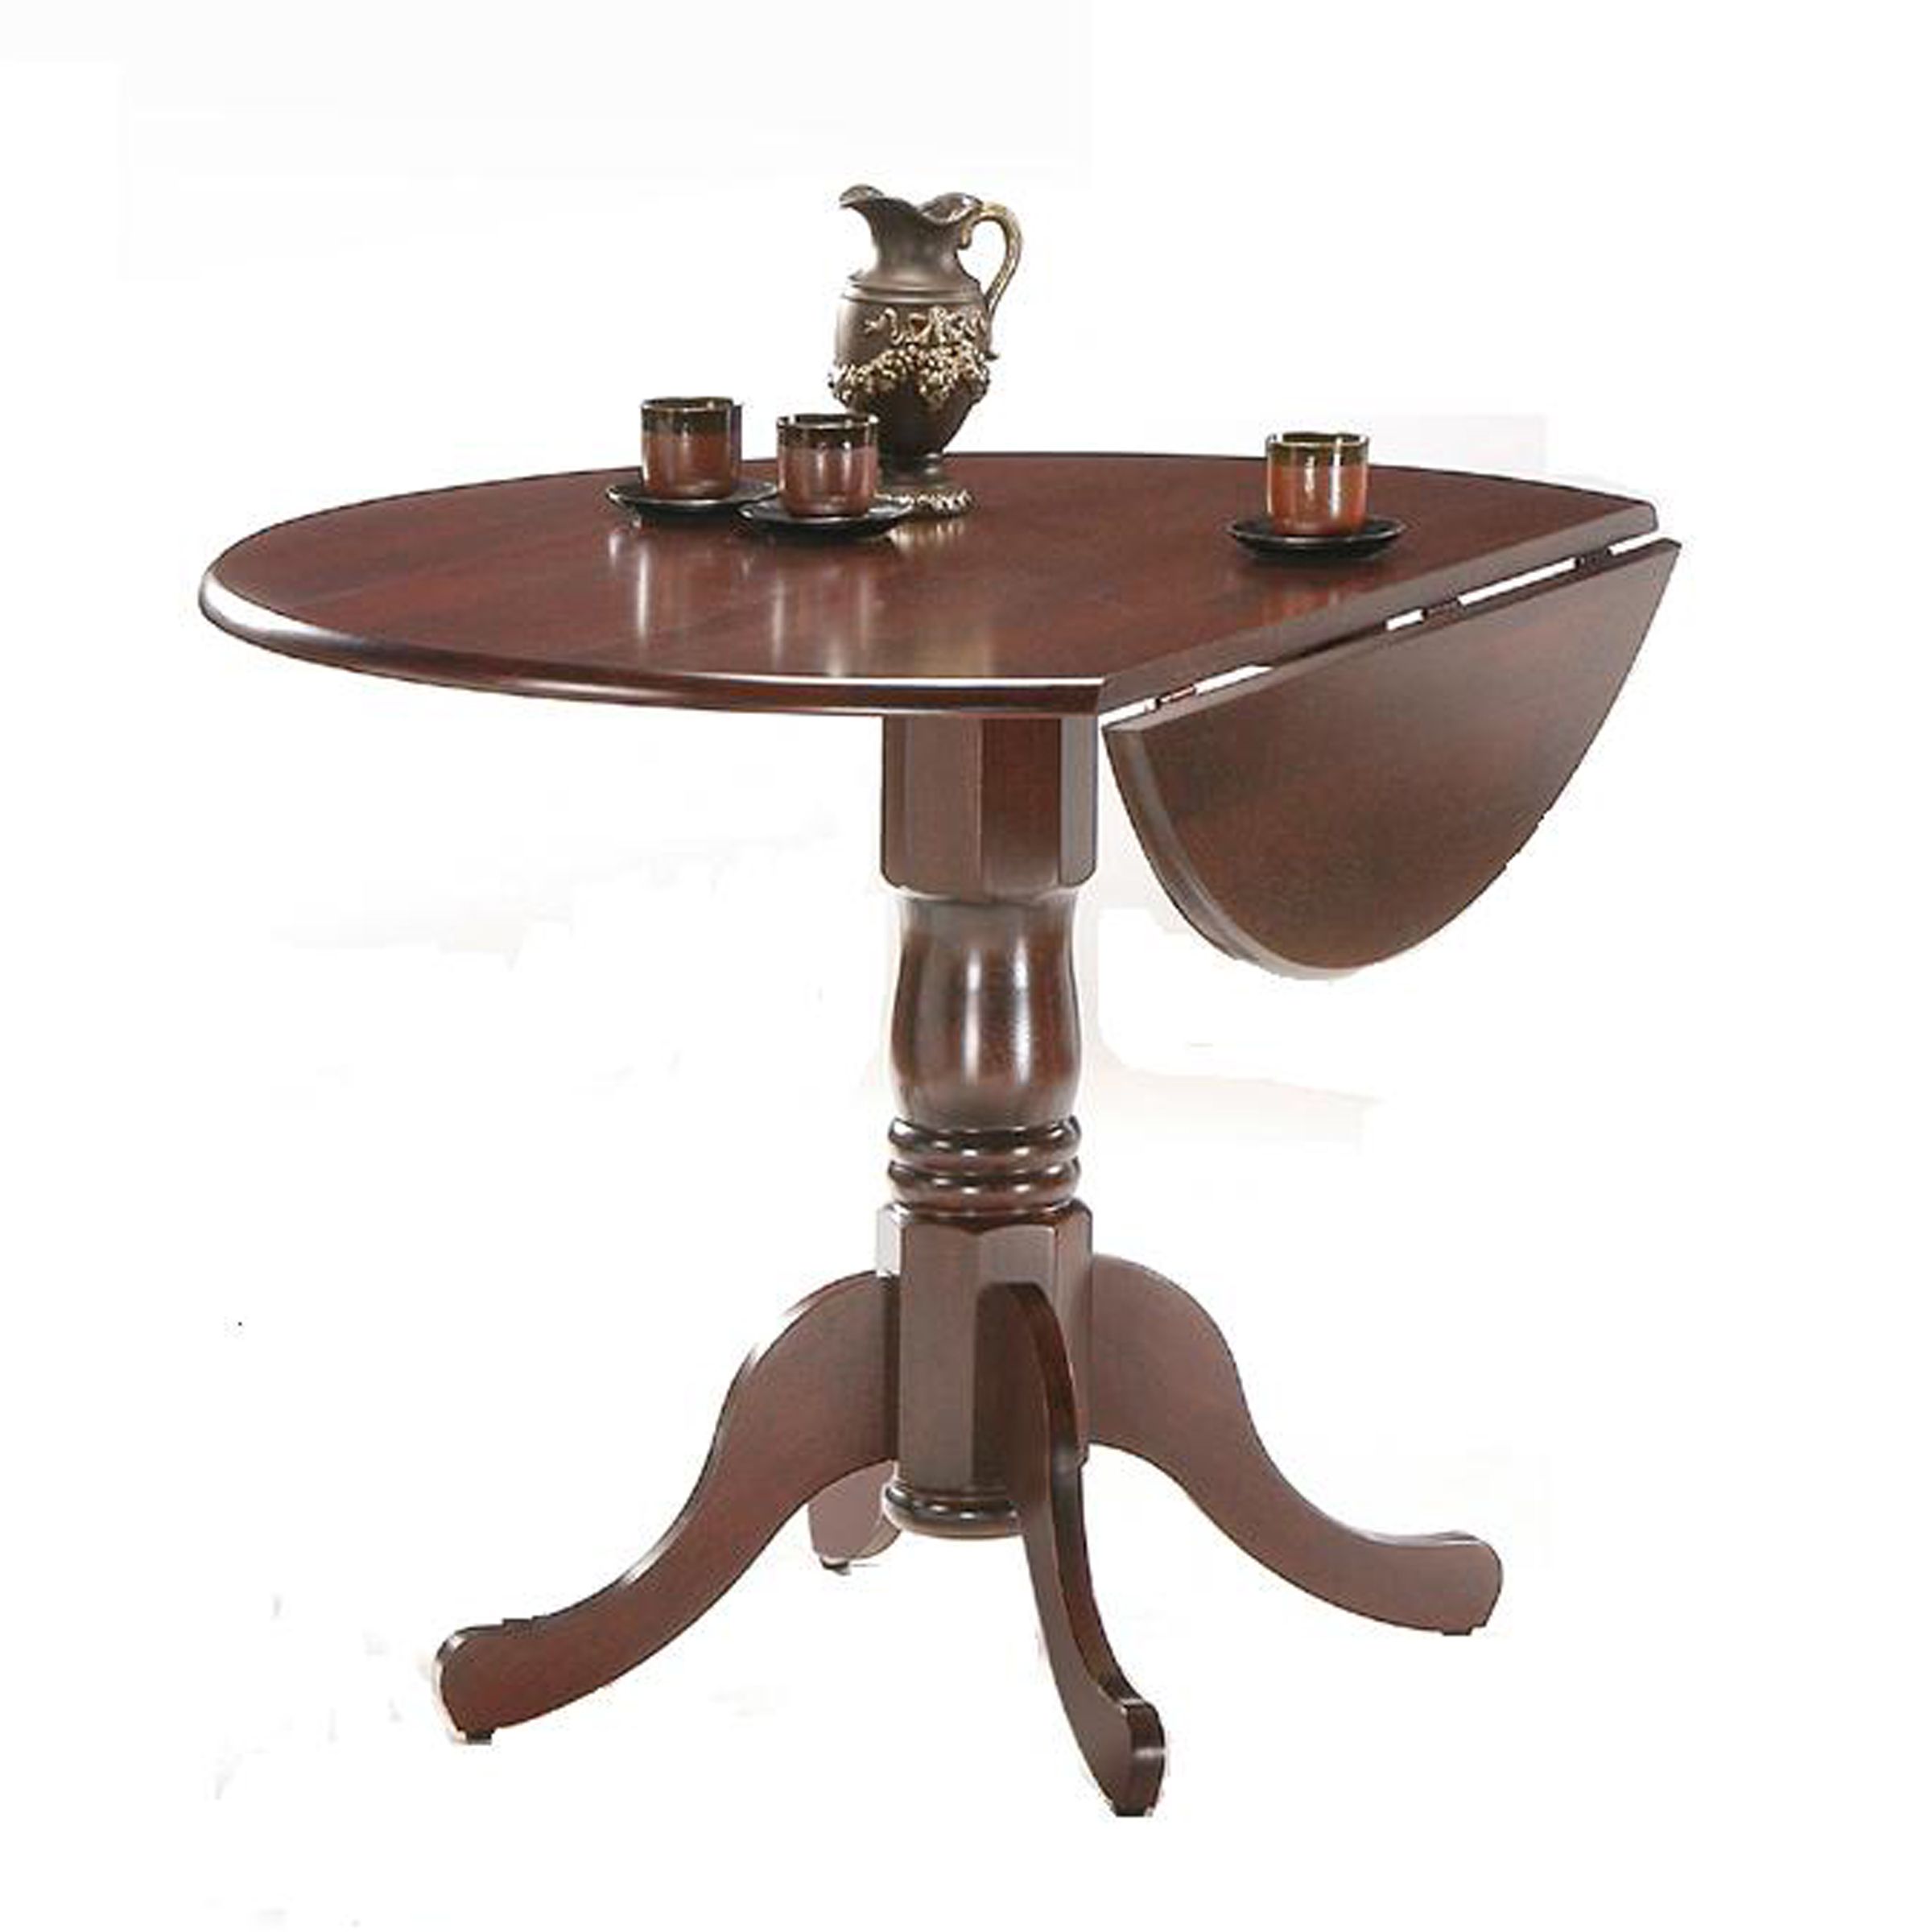 International Concepts 42" Round Dual Drop Leaf Ped Table